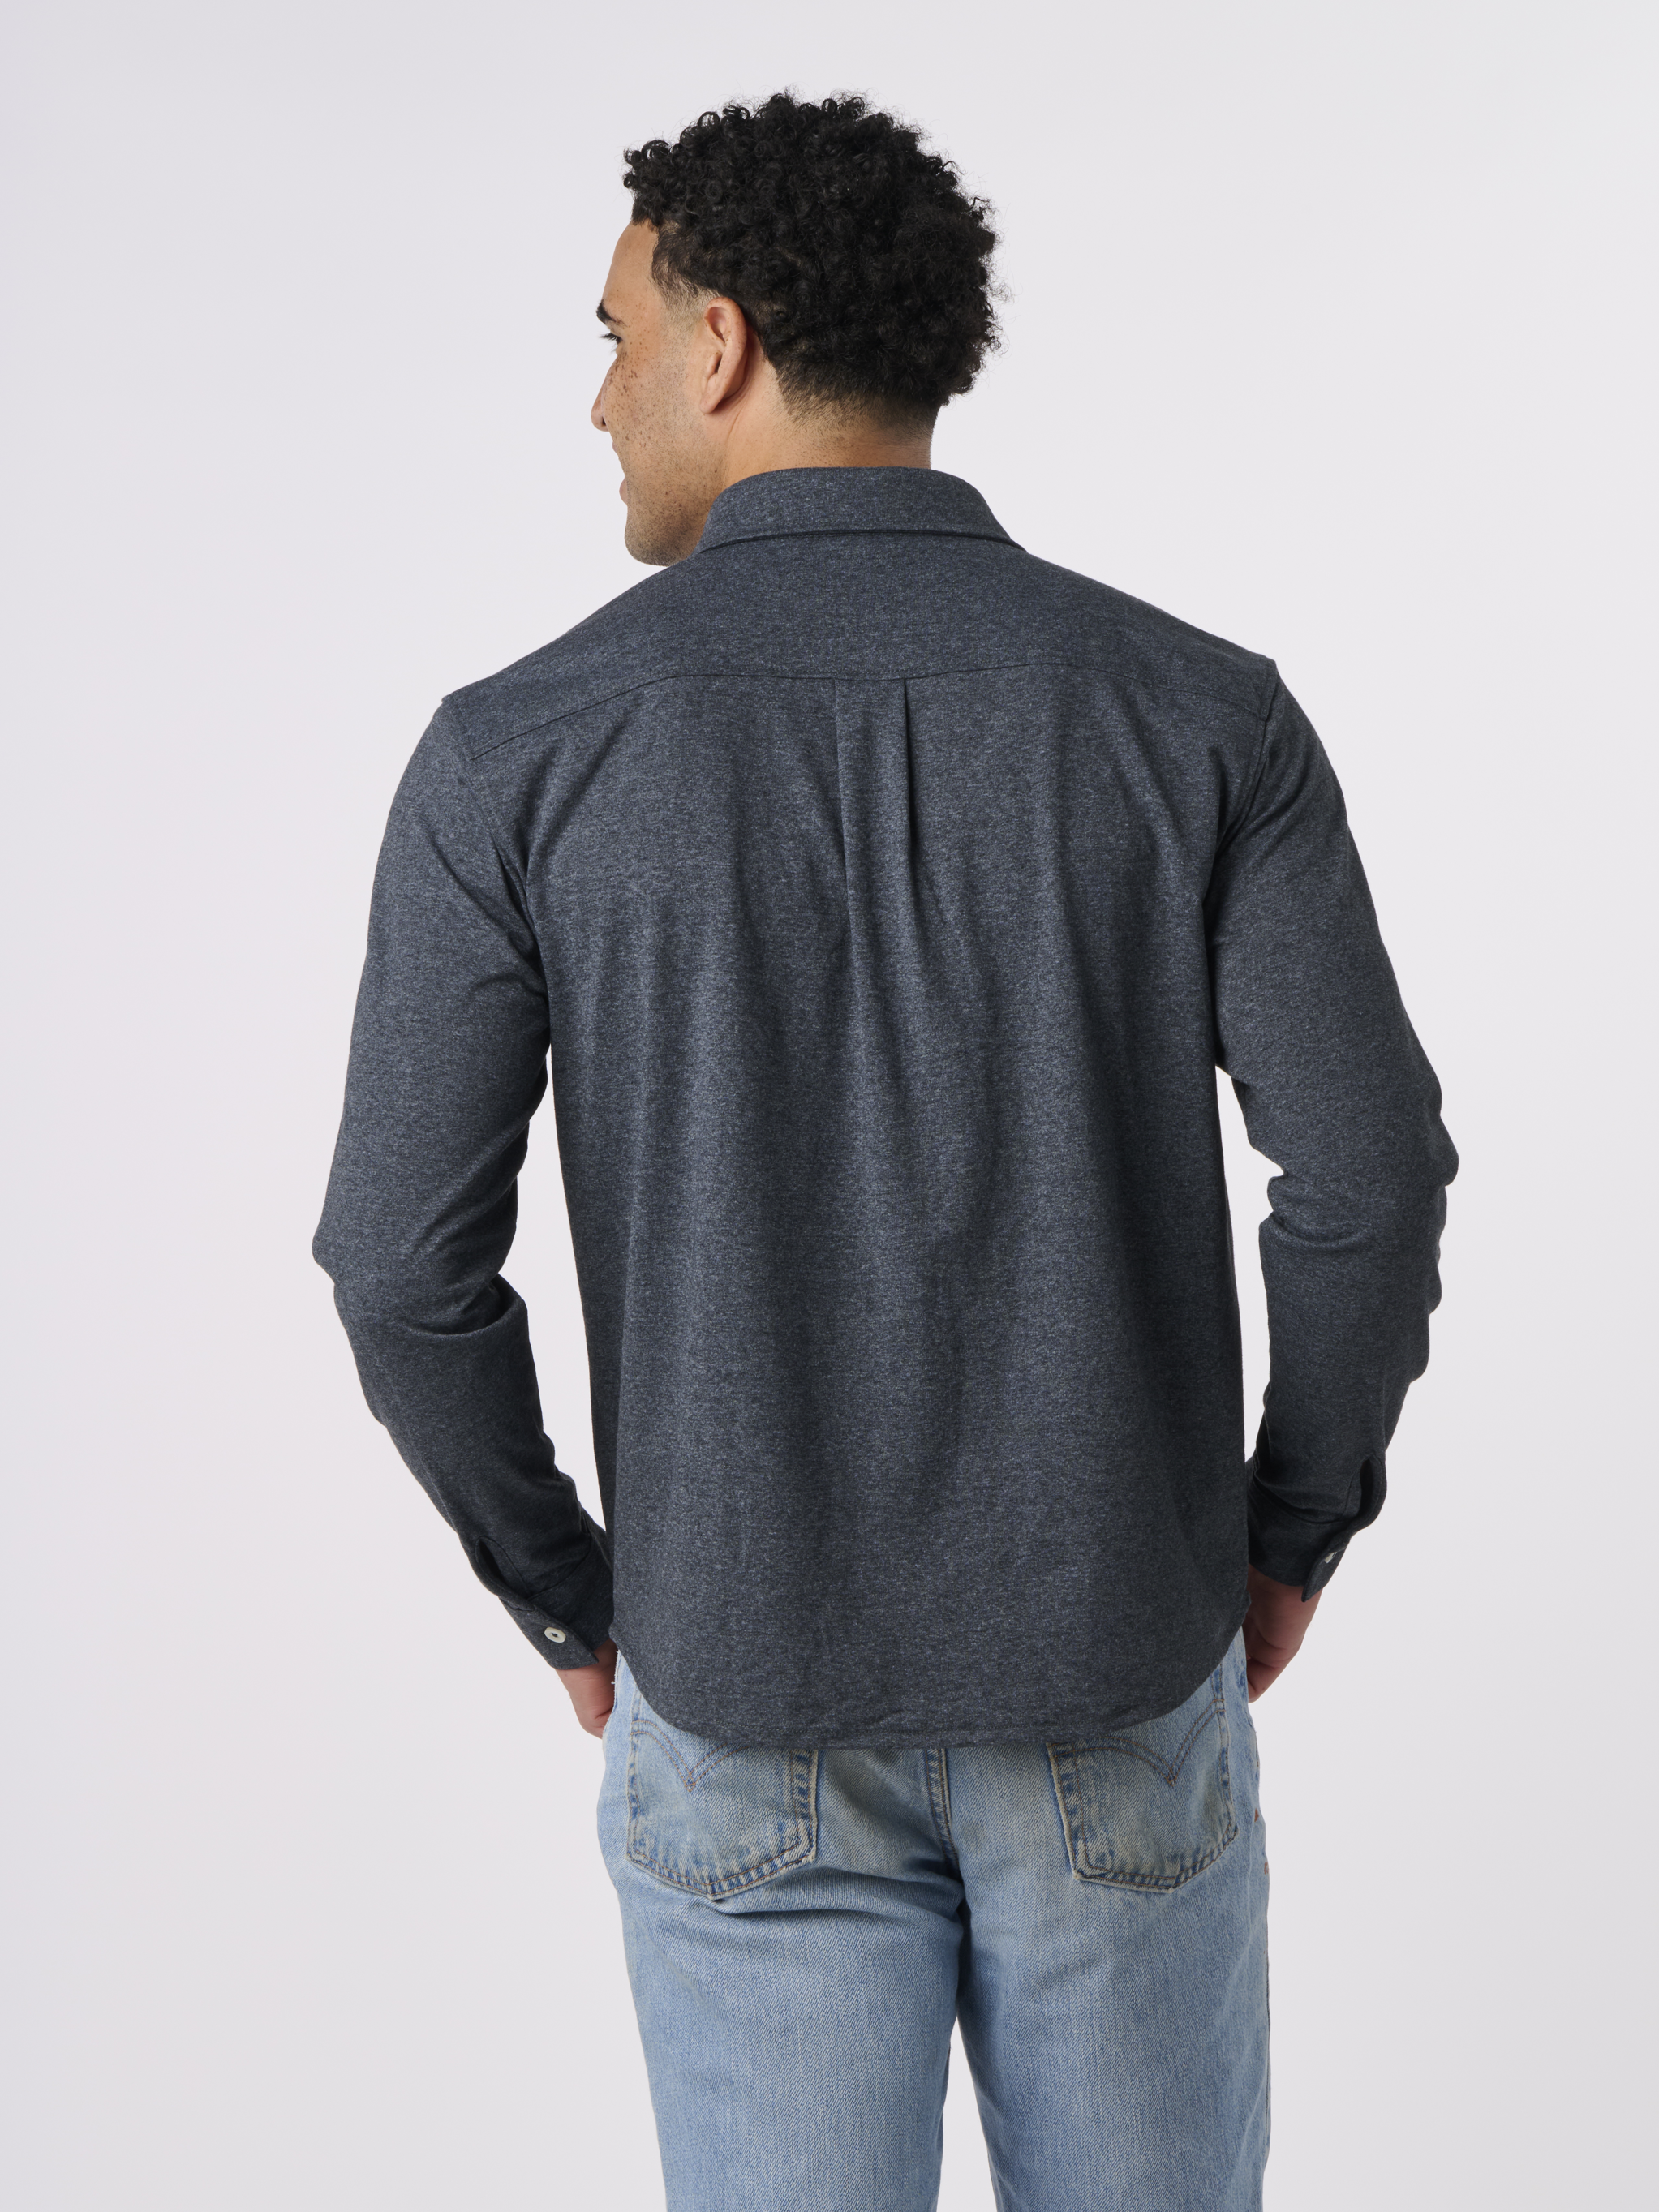 RECOVER_EC650_ECOBUTTONDOWN_CHARCOAL_BACK.png